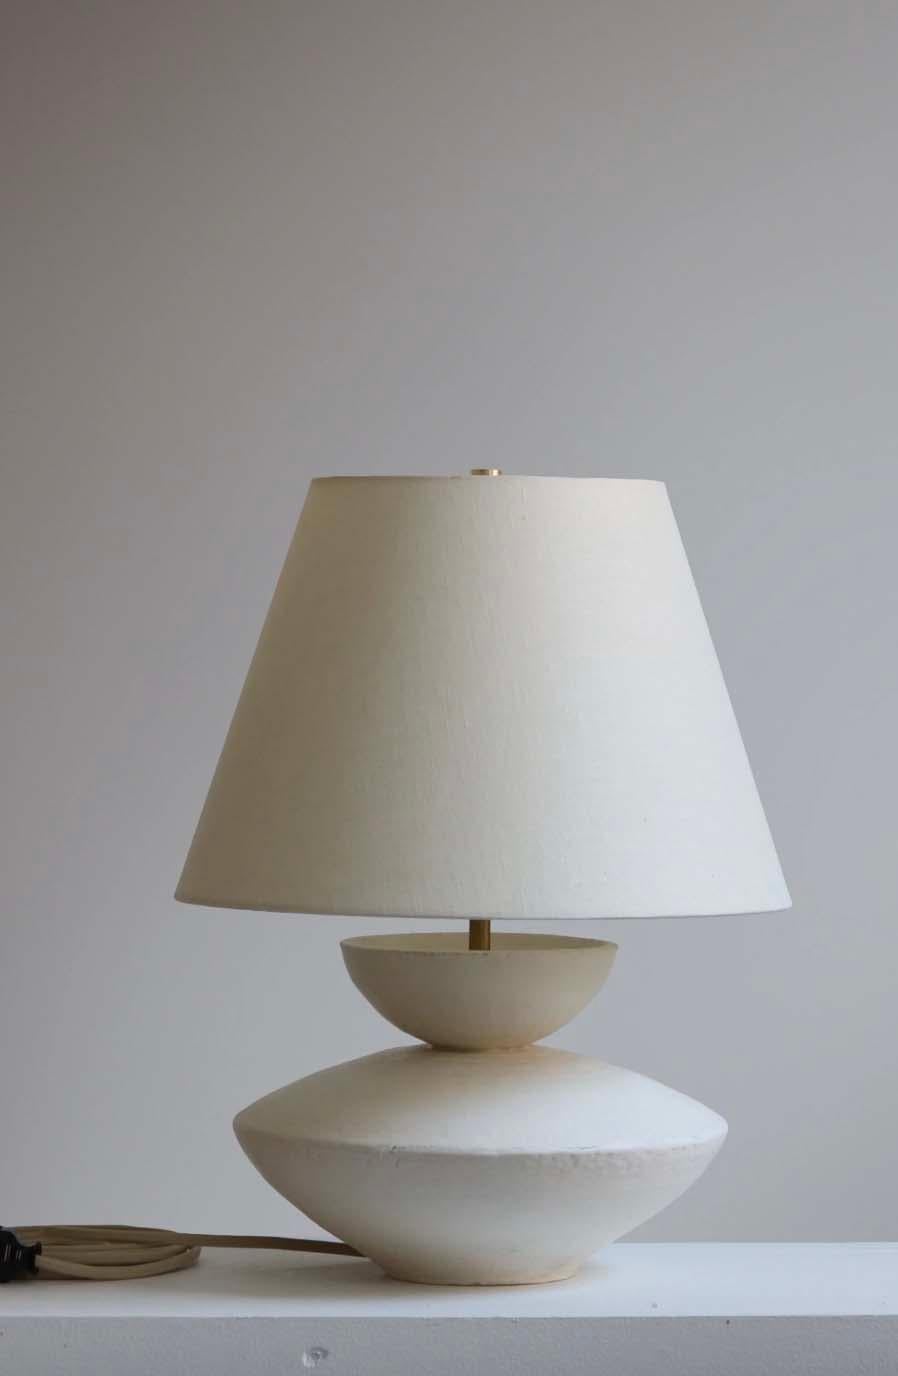 The Varinia lamp is handmade studio pottery by ceramic artist by Danny Kaplan. Shade included. Please note exact dimensions may vary.

Born in New York City and raised in Aix-en-Provence, France, Danny Kaplan’s passion for ceramics was shaped by